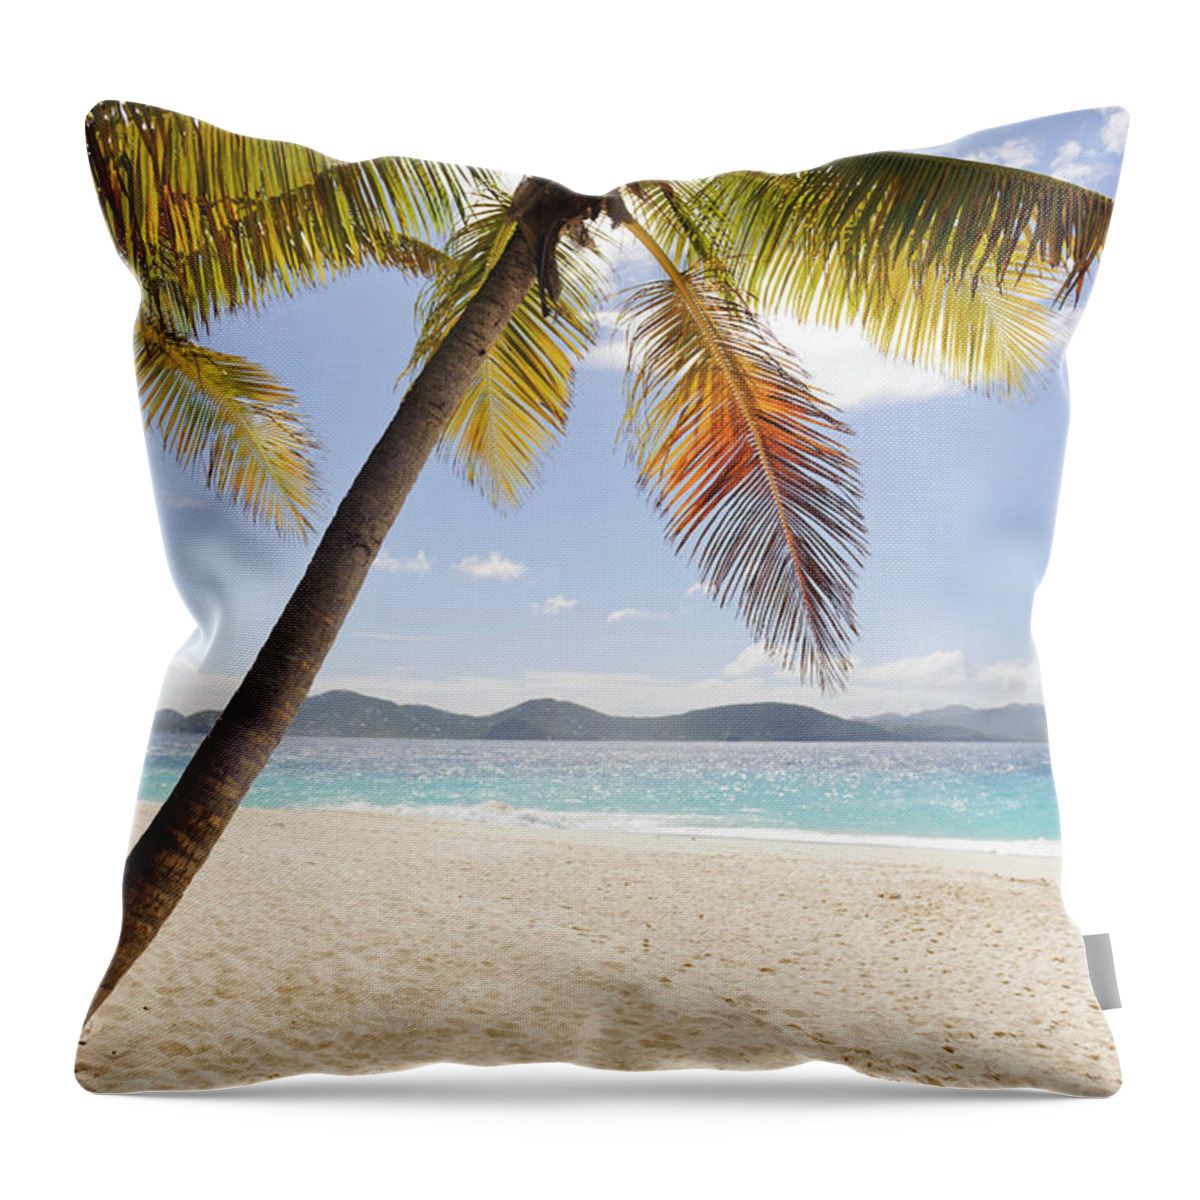 Tranquility Throw Pillow featuring the photograph Palms Over Sandy Beach by Johner Images